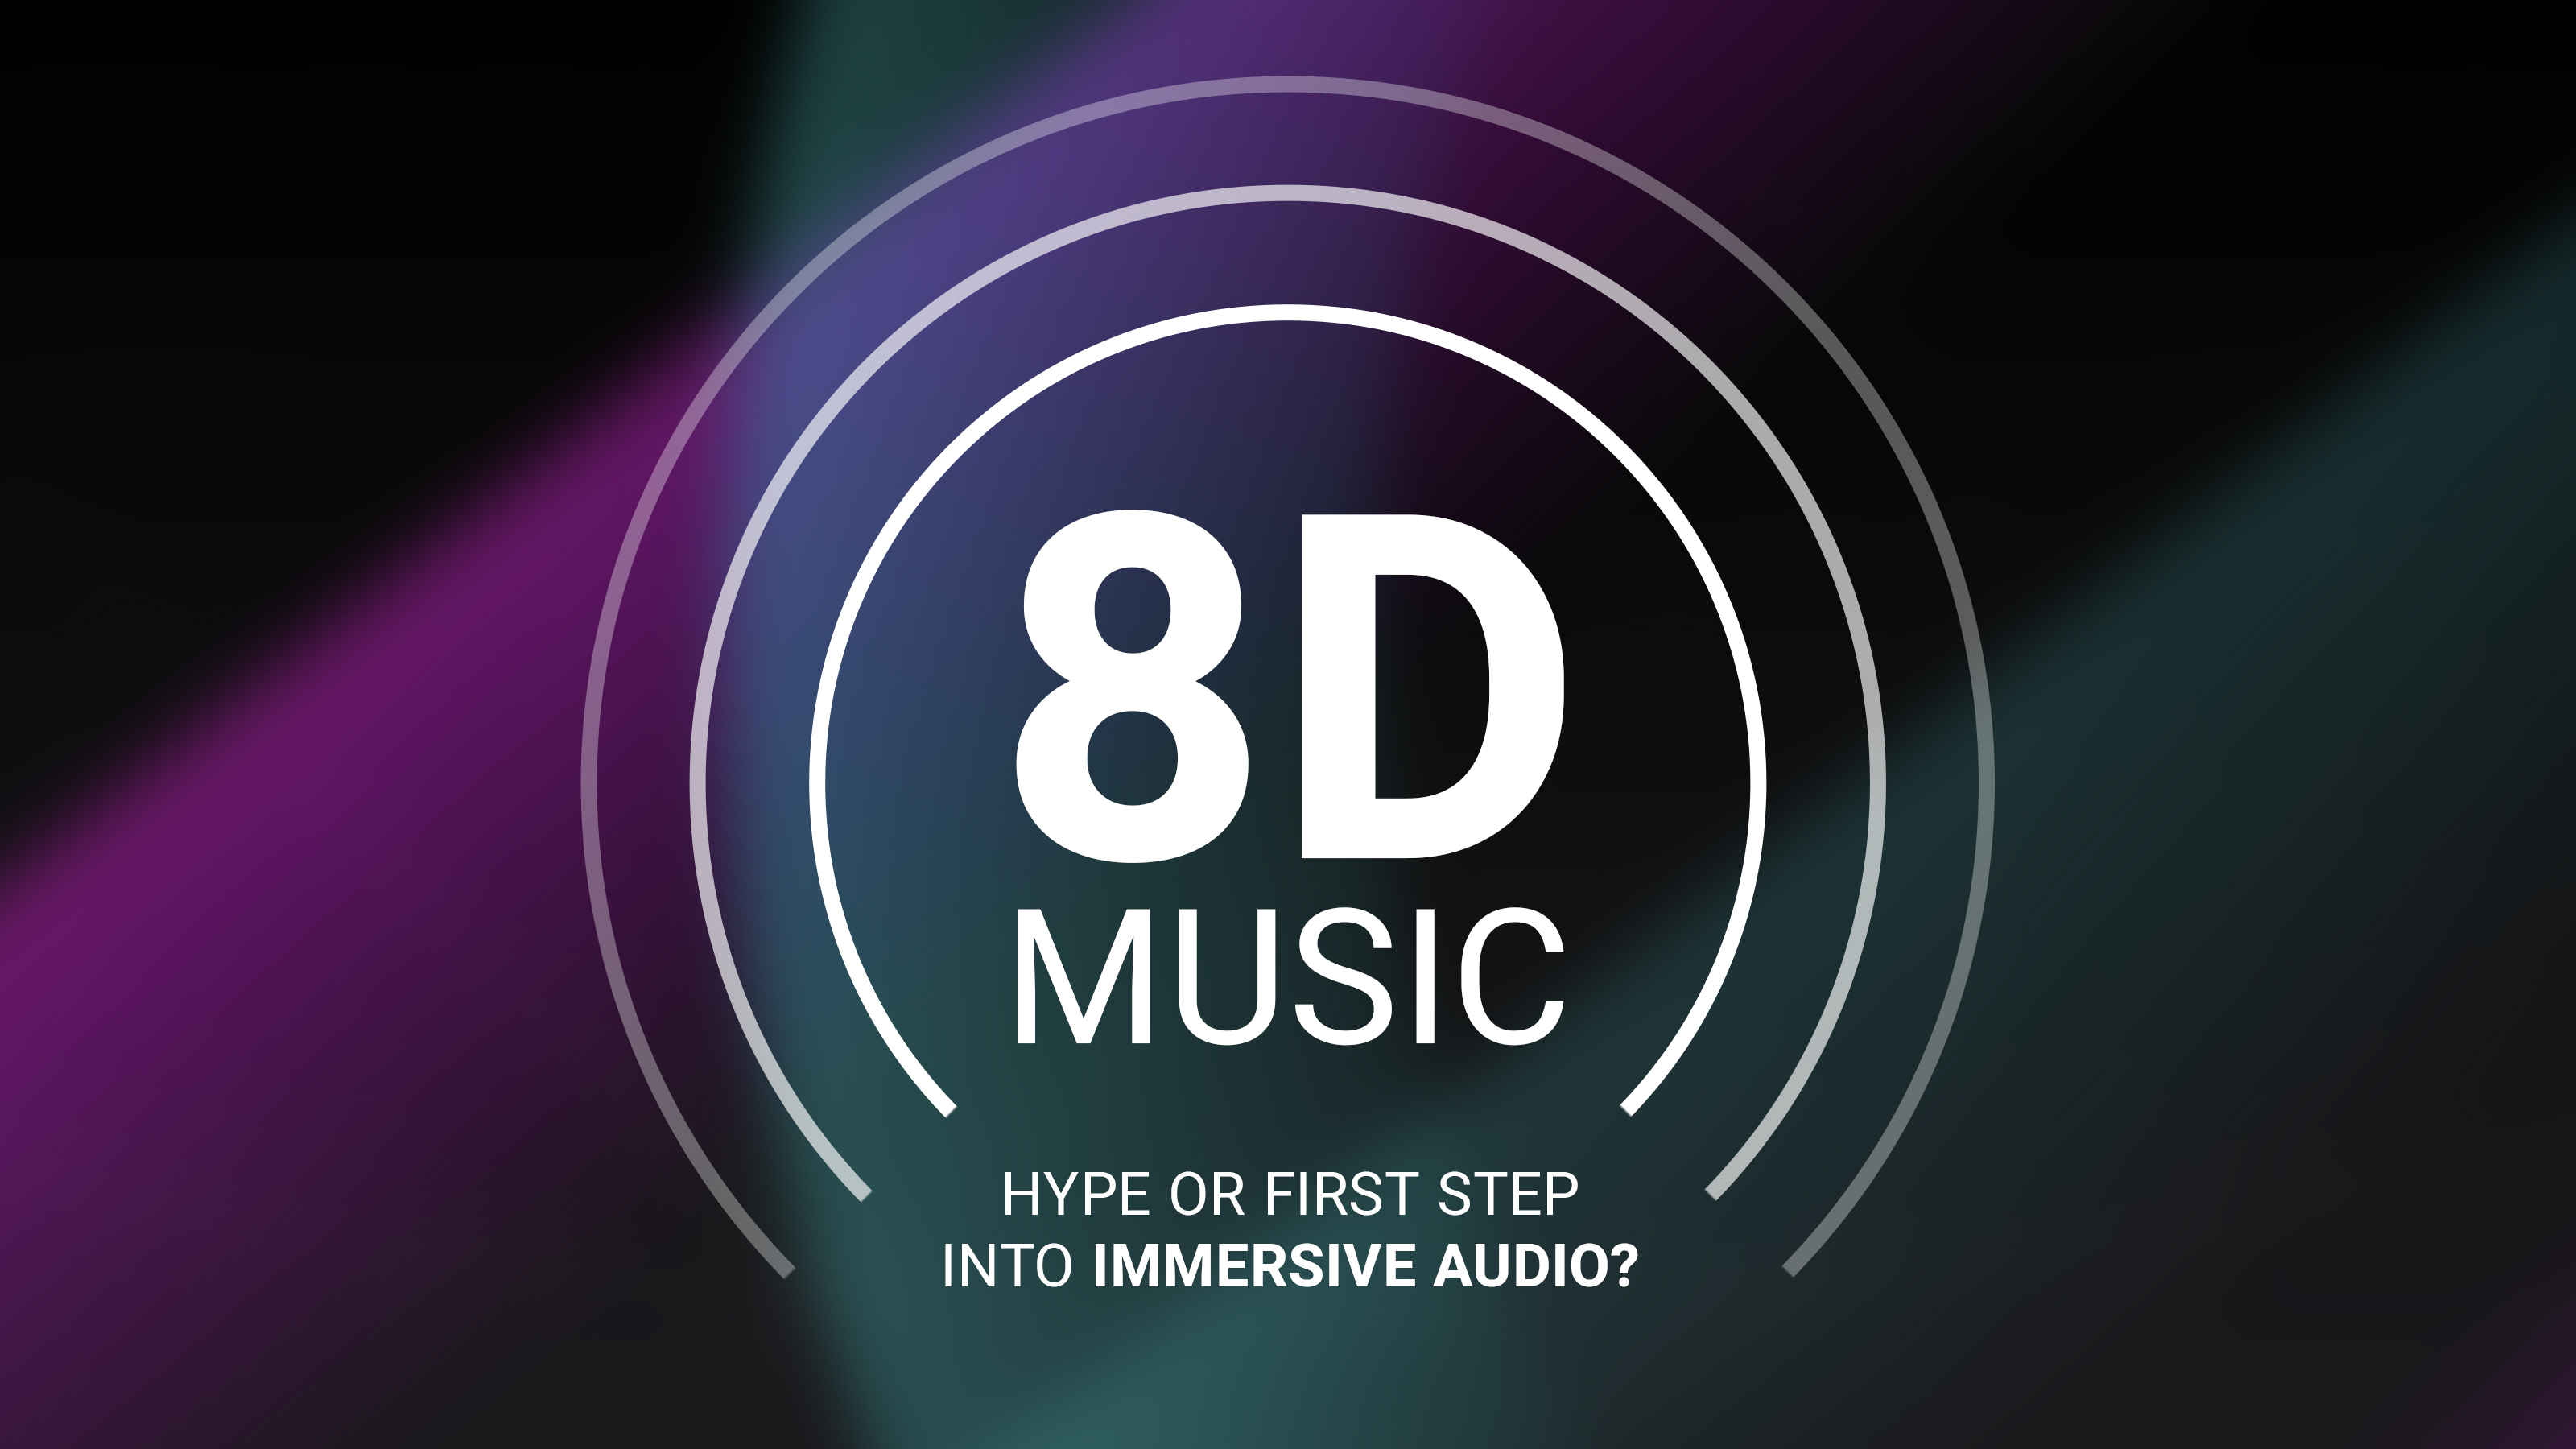 8D Music - Hype or first step into immersive audio?